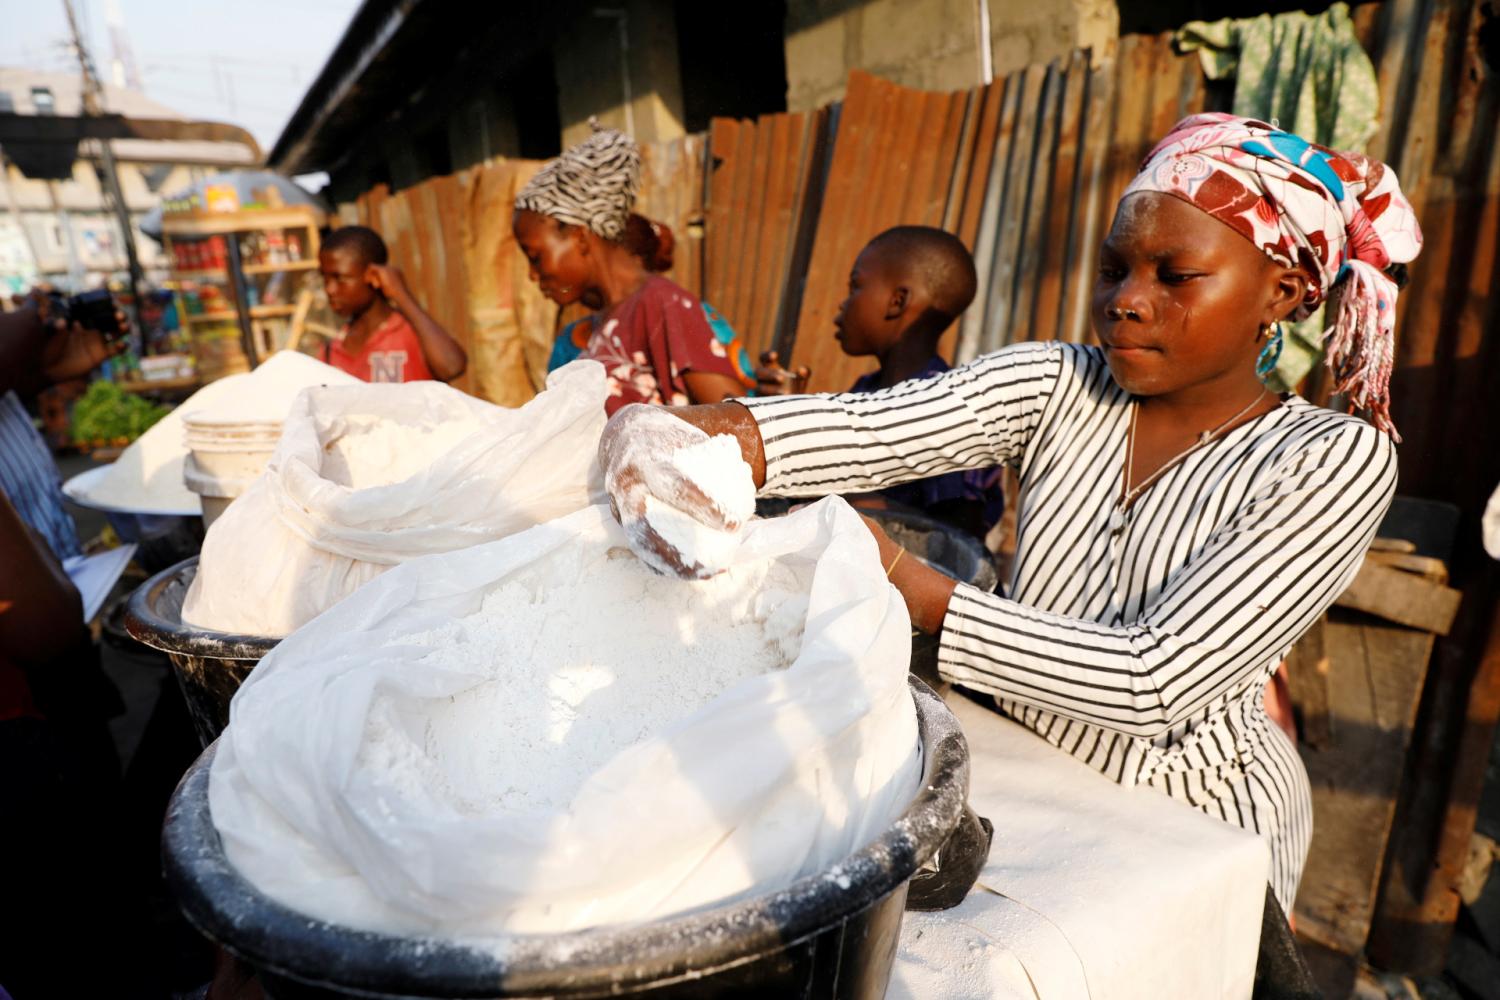 A vendor sells cassava flour at a traditional market in Bariga district, in Lagos, Nigeria January 15, 2021. Picture taken January 15, 2021. REUTERS/Temilade Adelaja